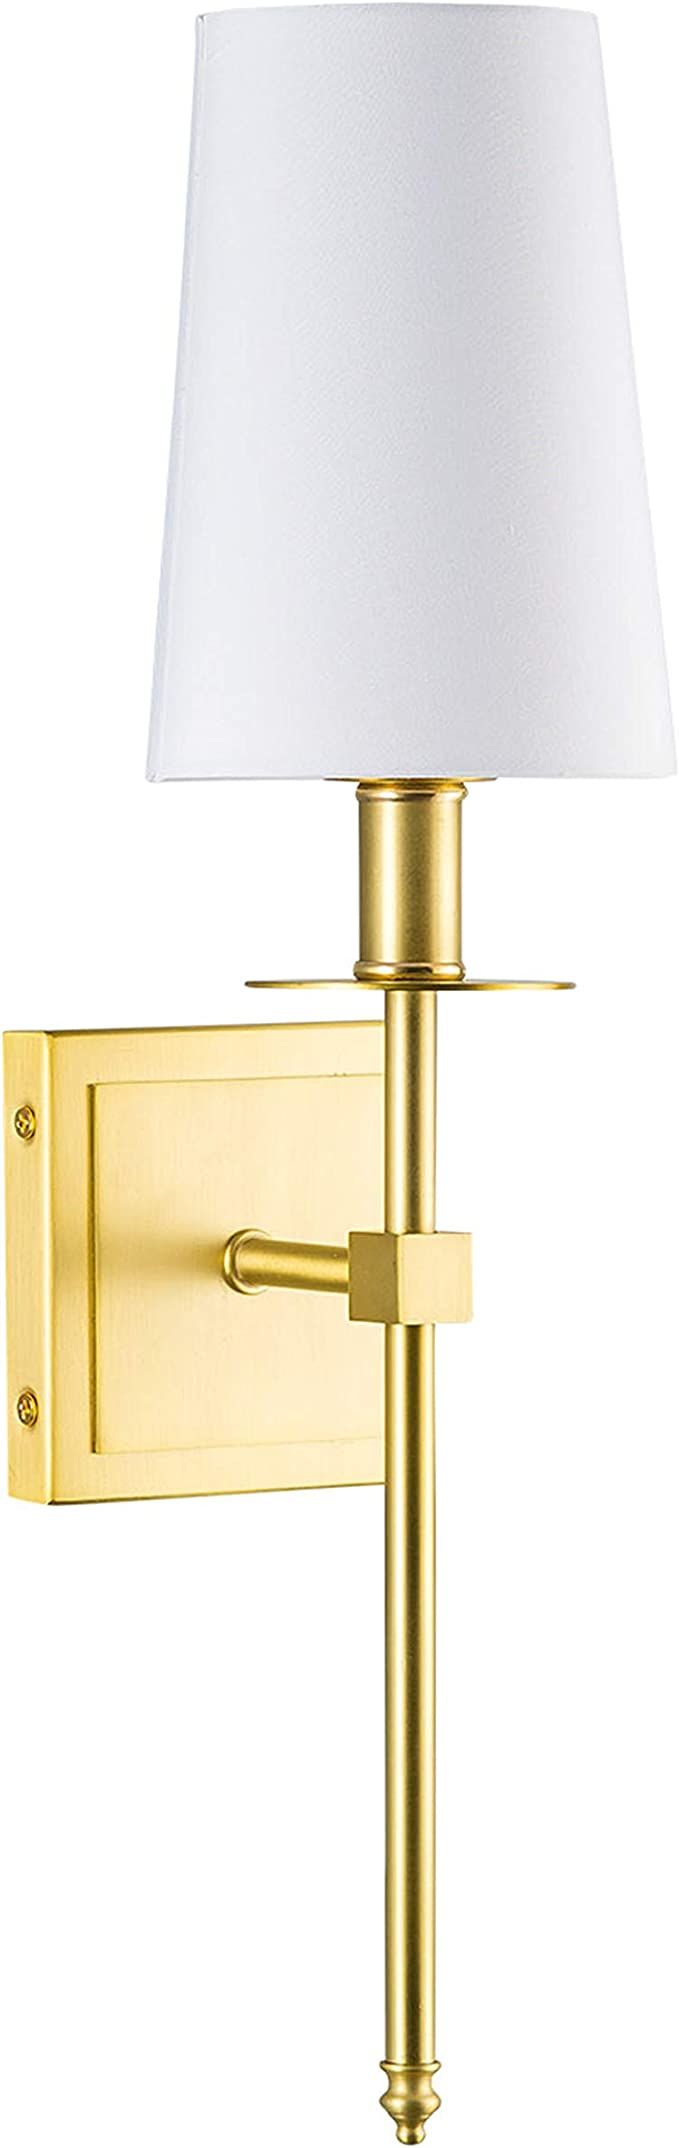 Linea di Liara Torcia Gold Wall Sconces with Shade Brushed Brass Wallchiere Wall Lamp for Bedroom... | Amazon (US)